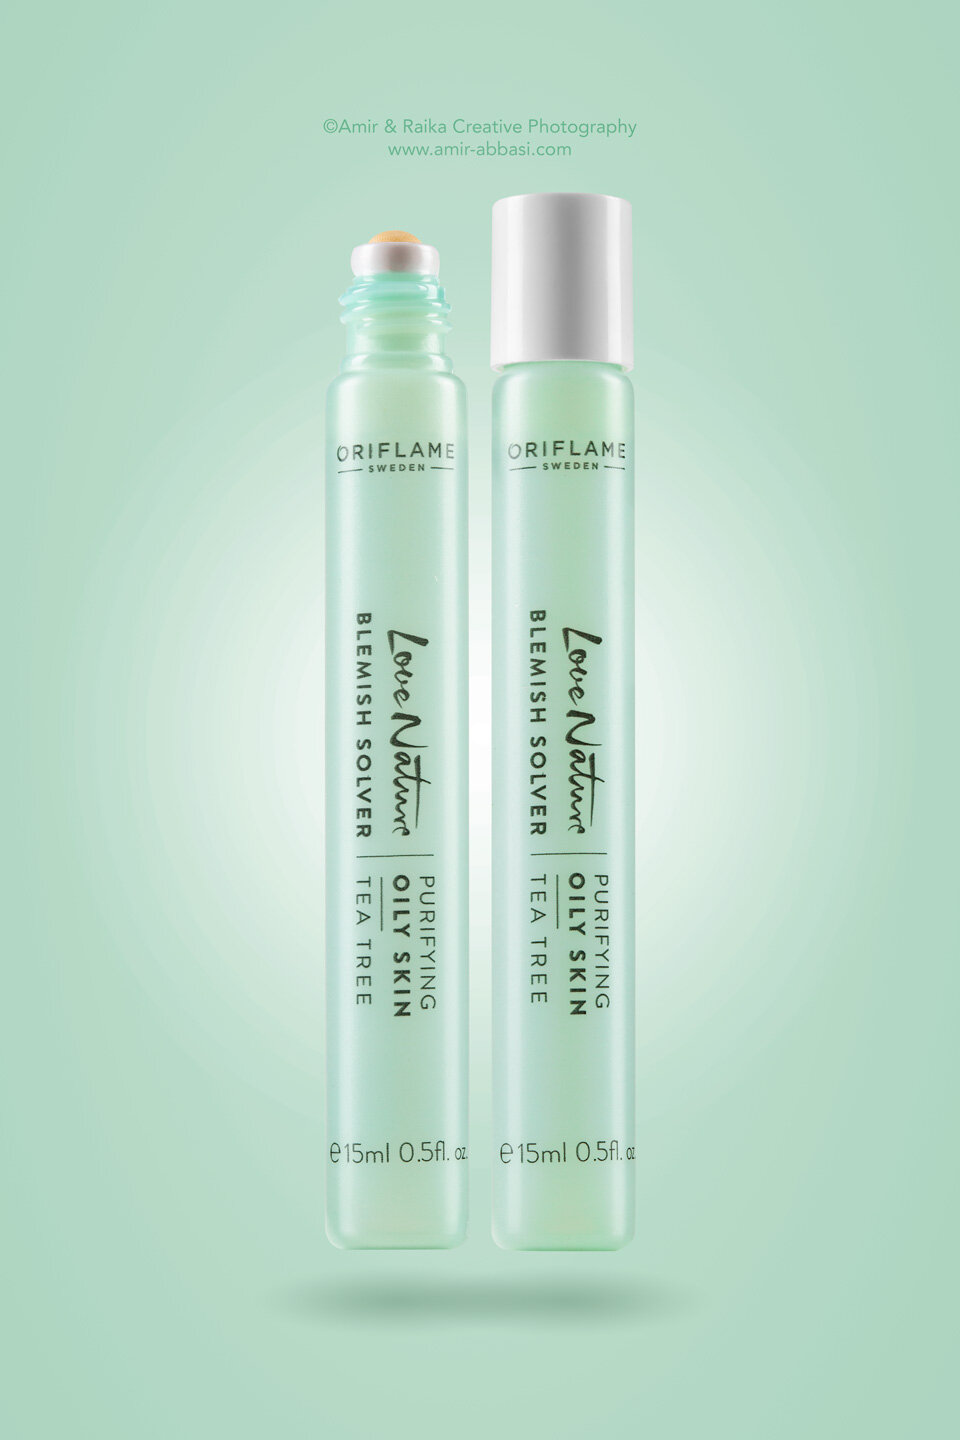 Oriflame Cosmetics product photography